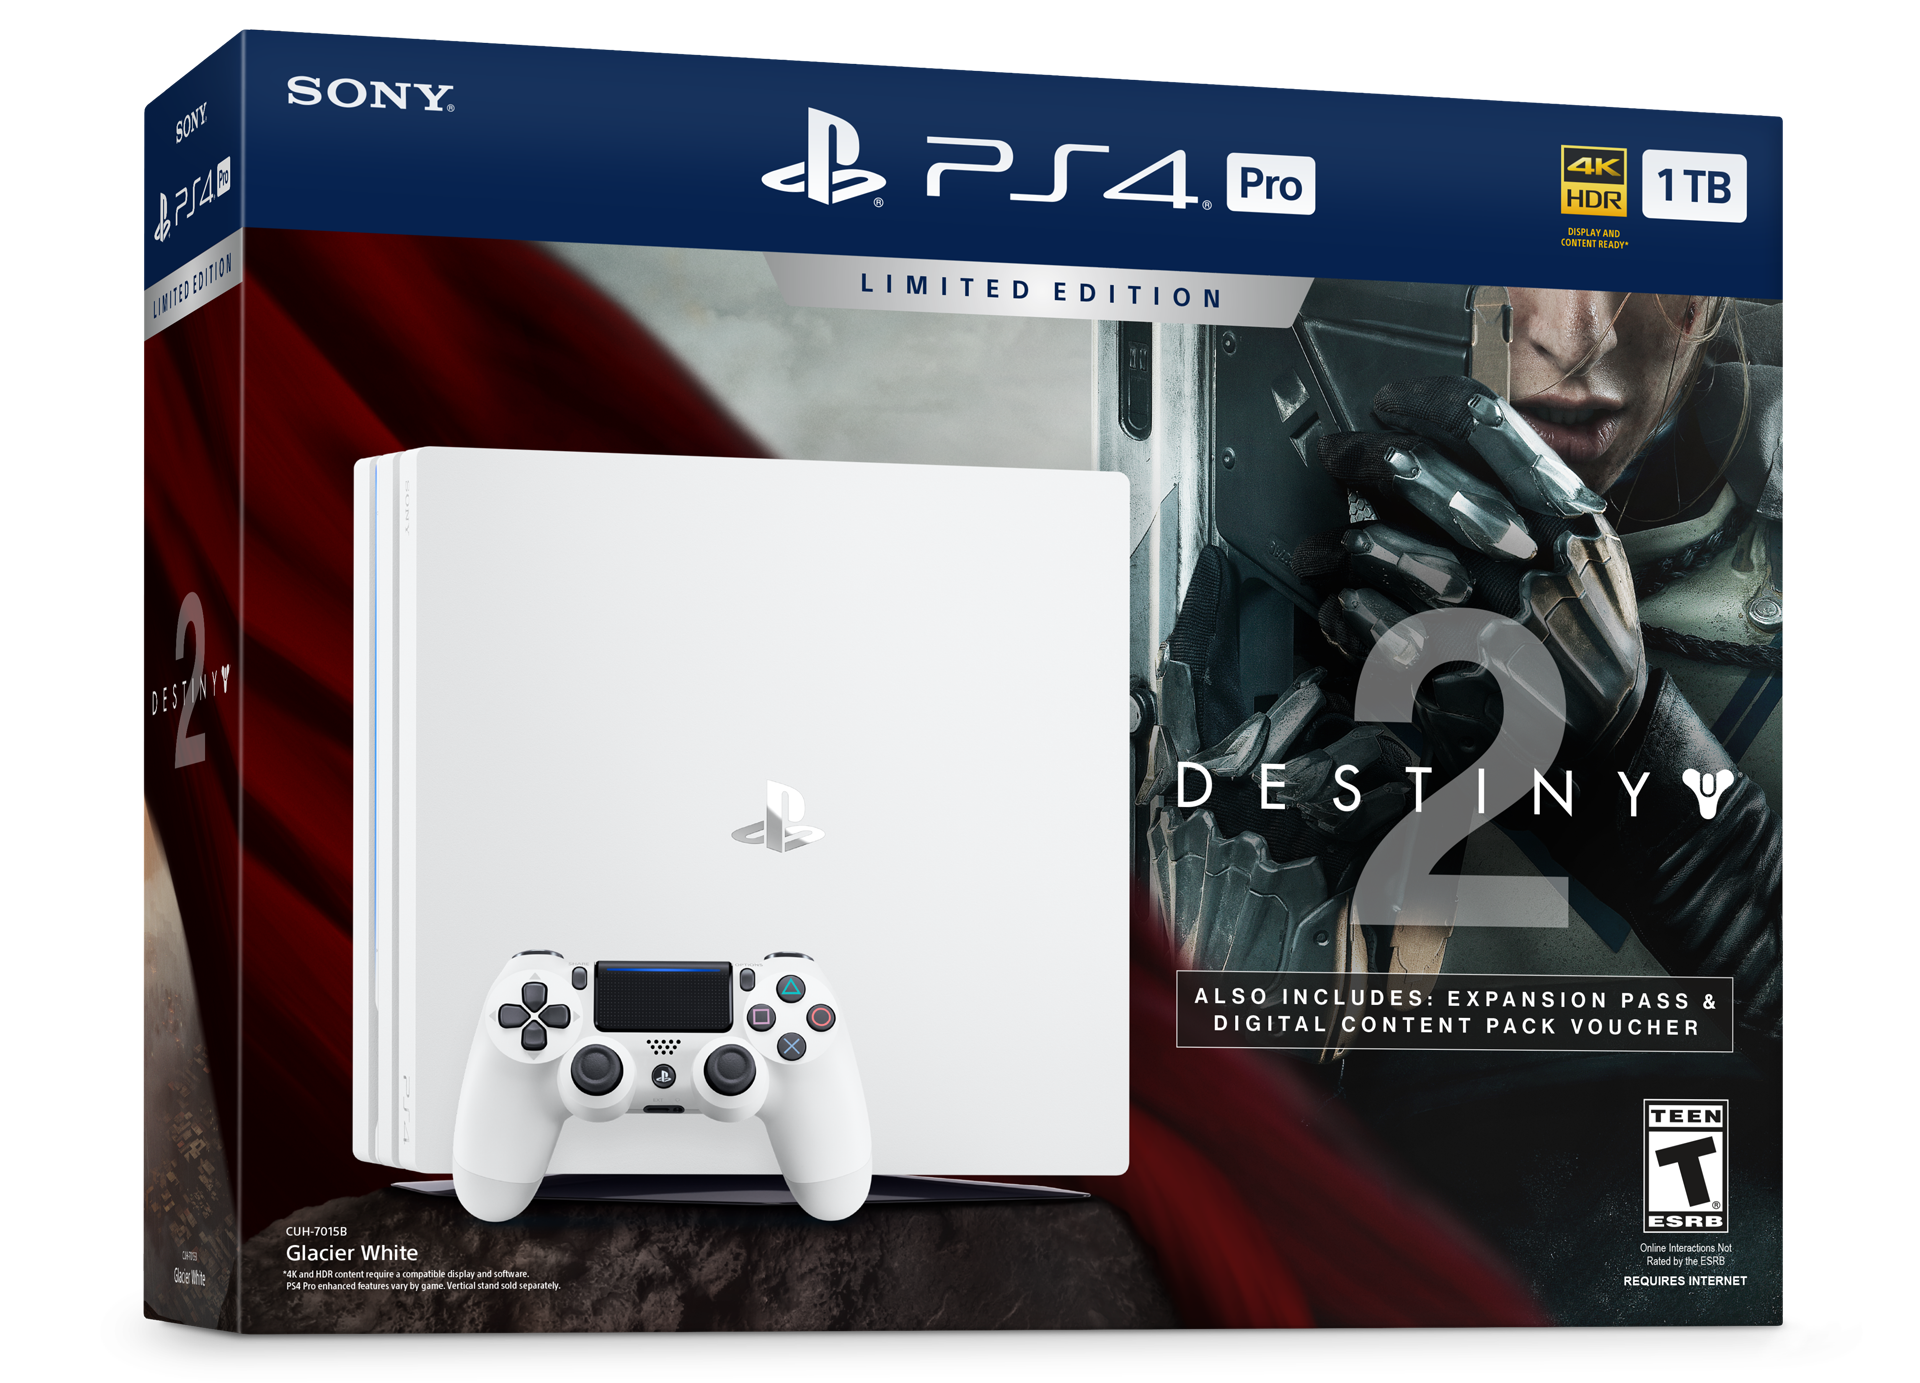 PlayStation on Twitter: "Introducing the Limited Destiny 2 Pro Bundle, featuring the Glacier White PS4 Pro: https://t.co/Ntgbnj7rNm https://t.co/IK2nlUiyD1" / Twitter